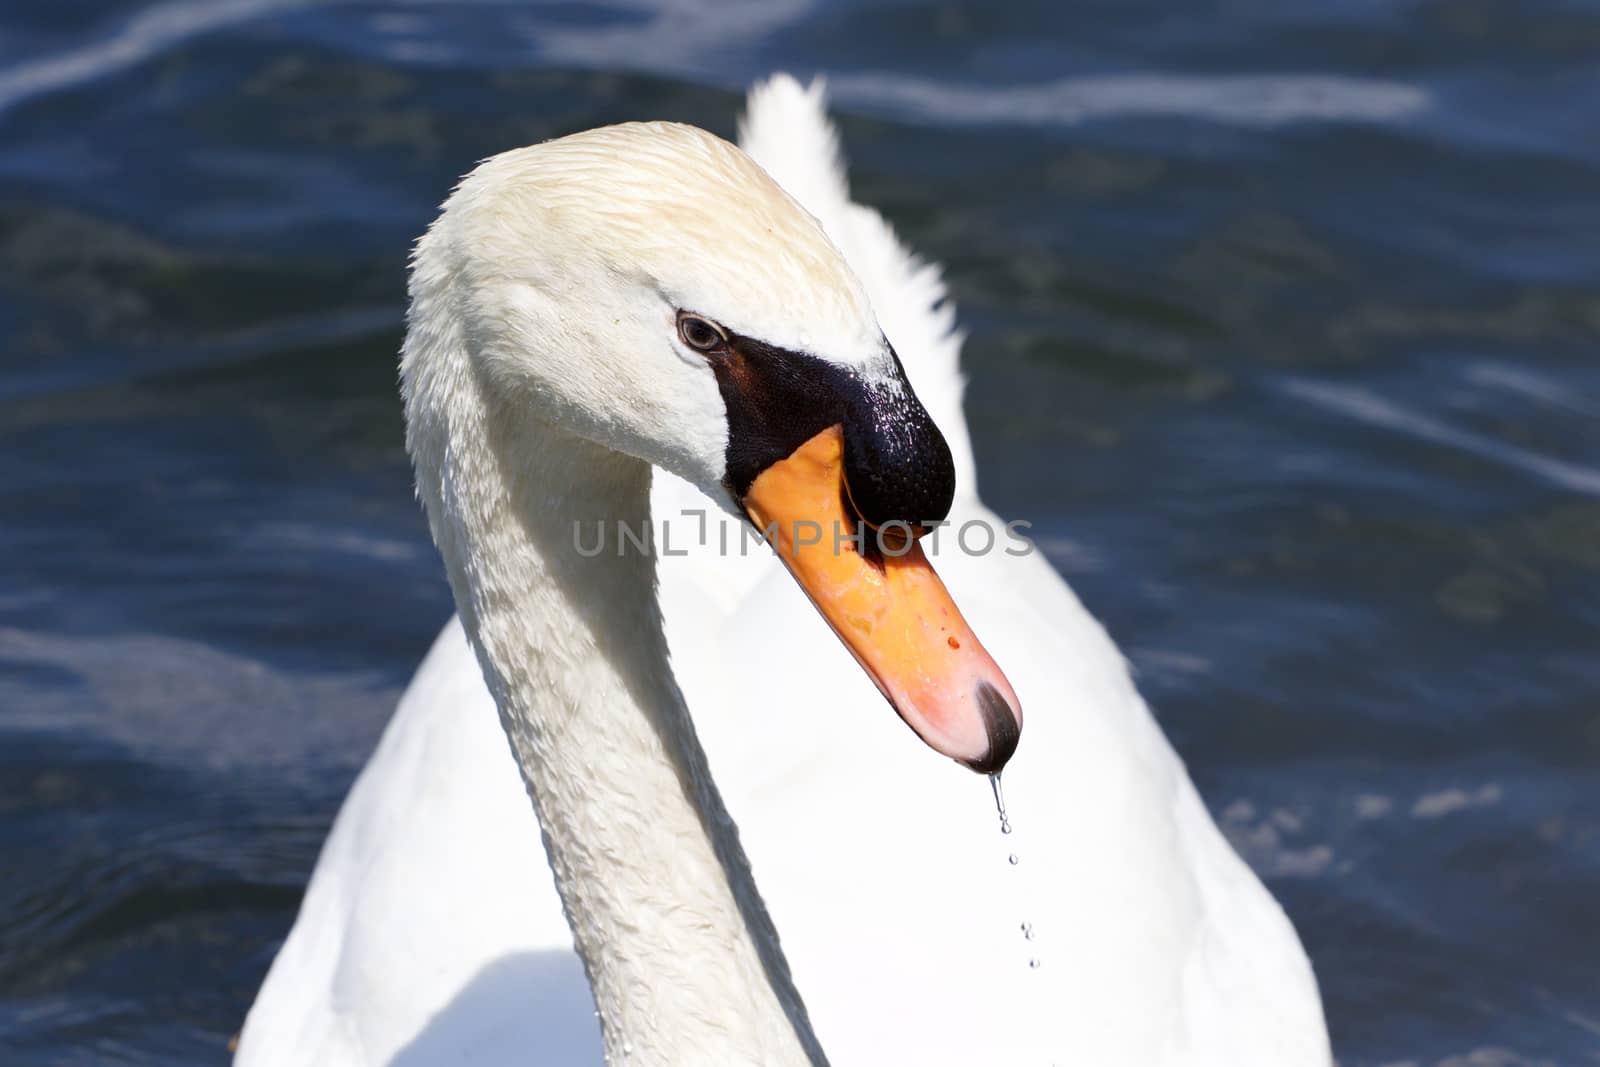 The beautiful portrait of the thoughtful mute swan by teo